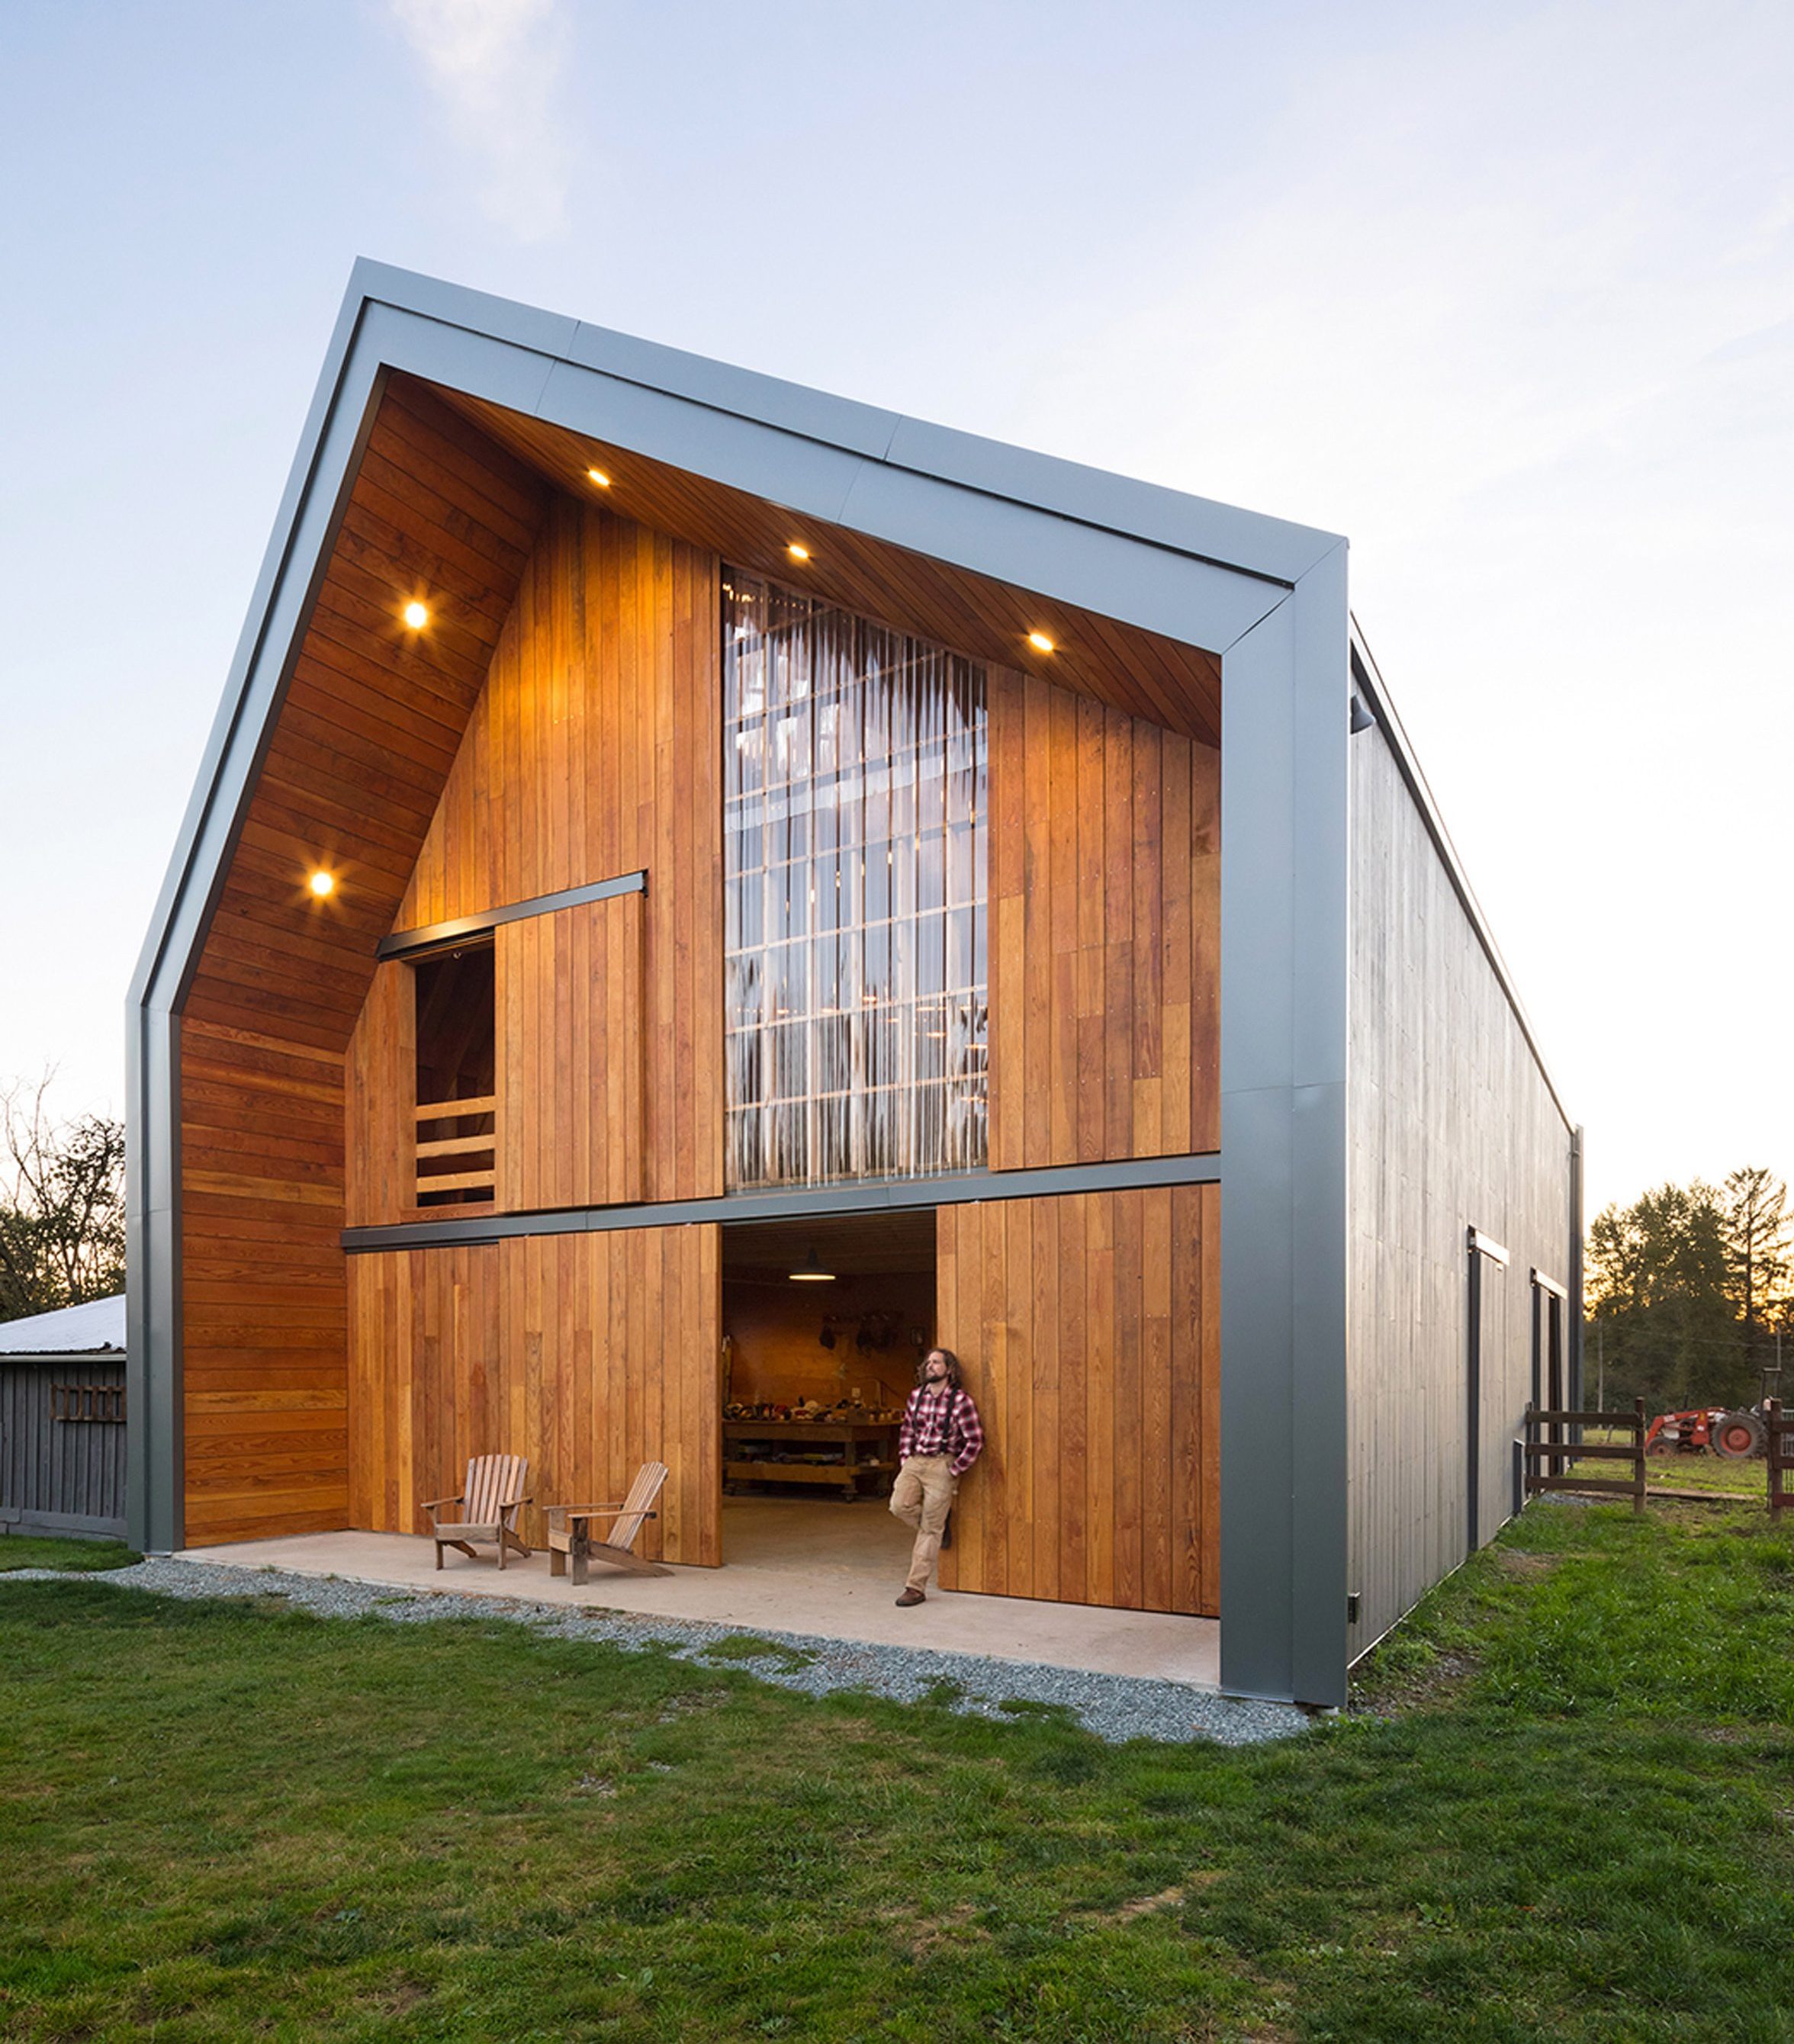 Asher deGroot builds Swallowfield Barn with help of local community